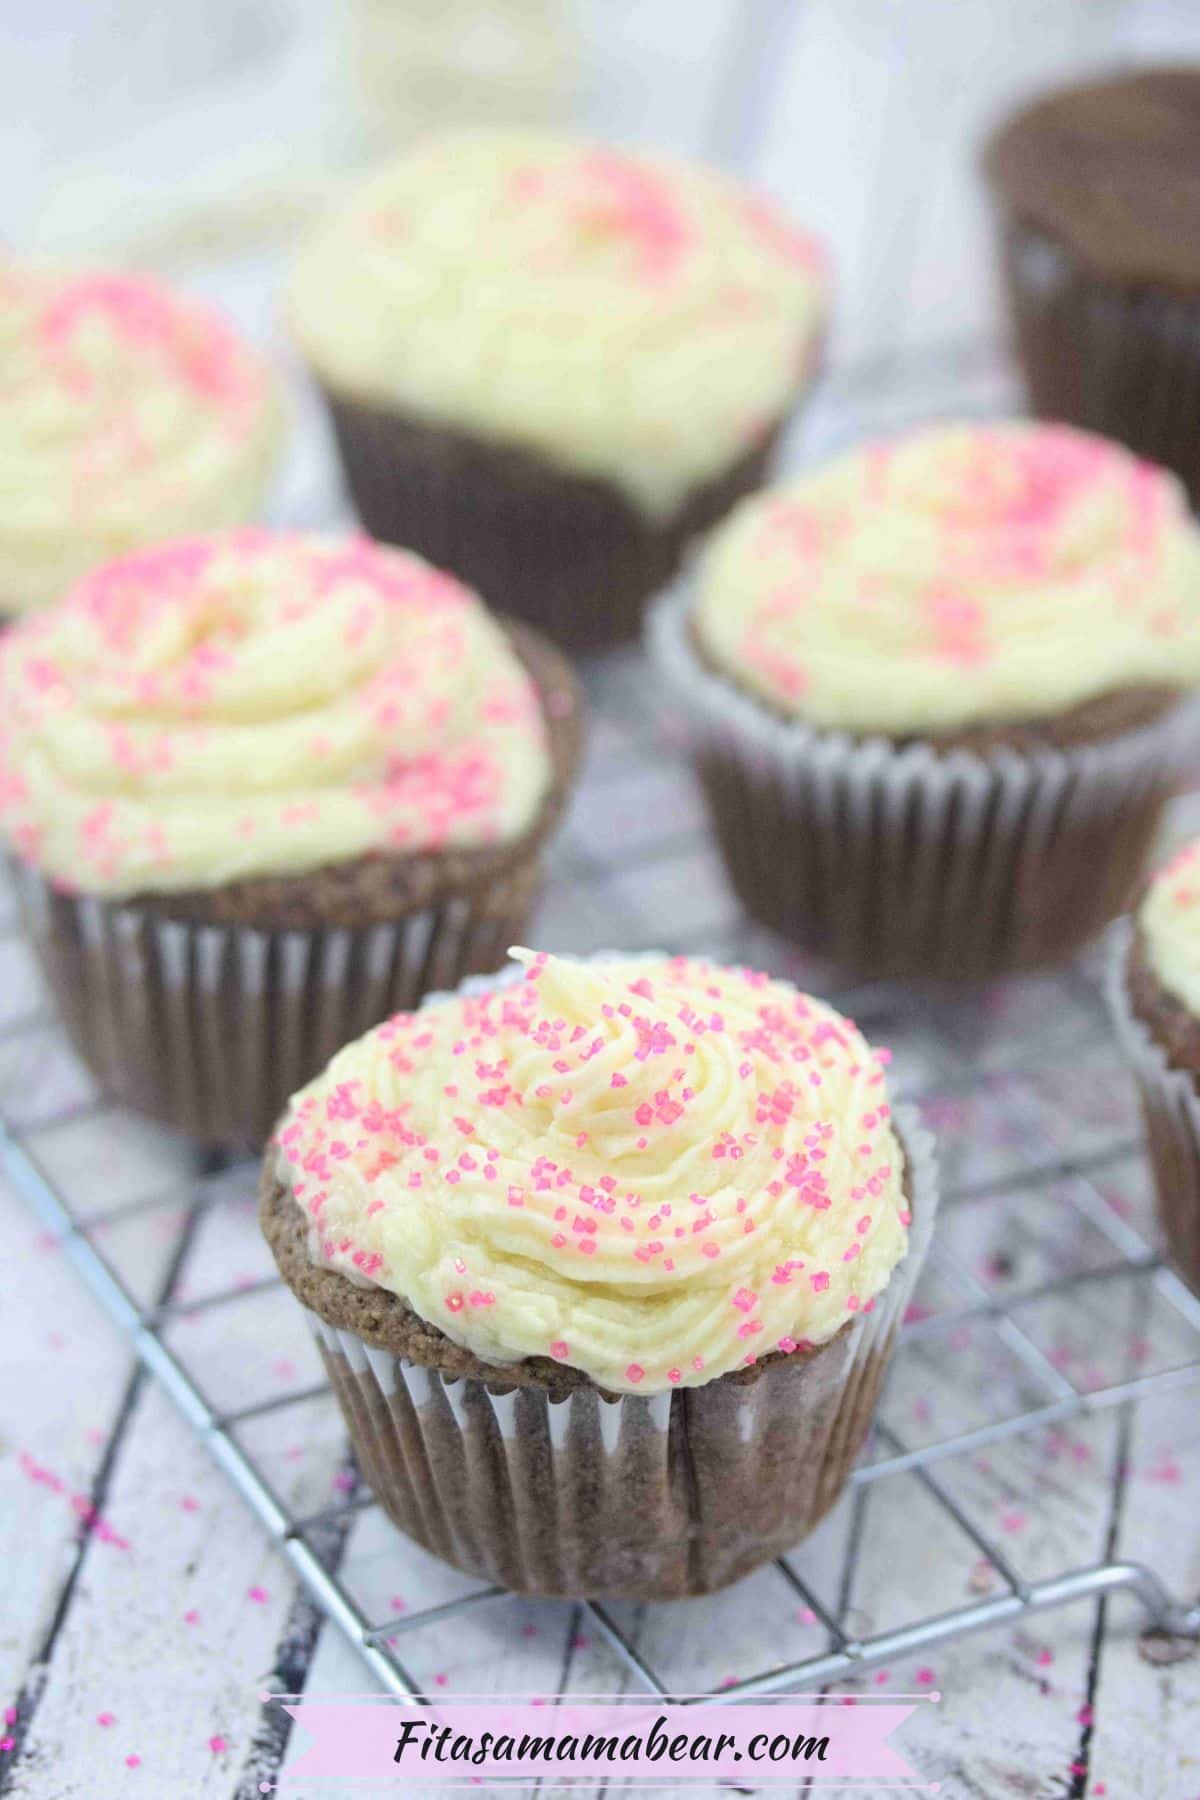 Chocolate protein cupcakes topped with vanilla buttercream frosting with pink sprinkles.